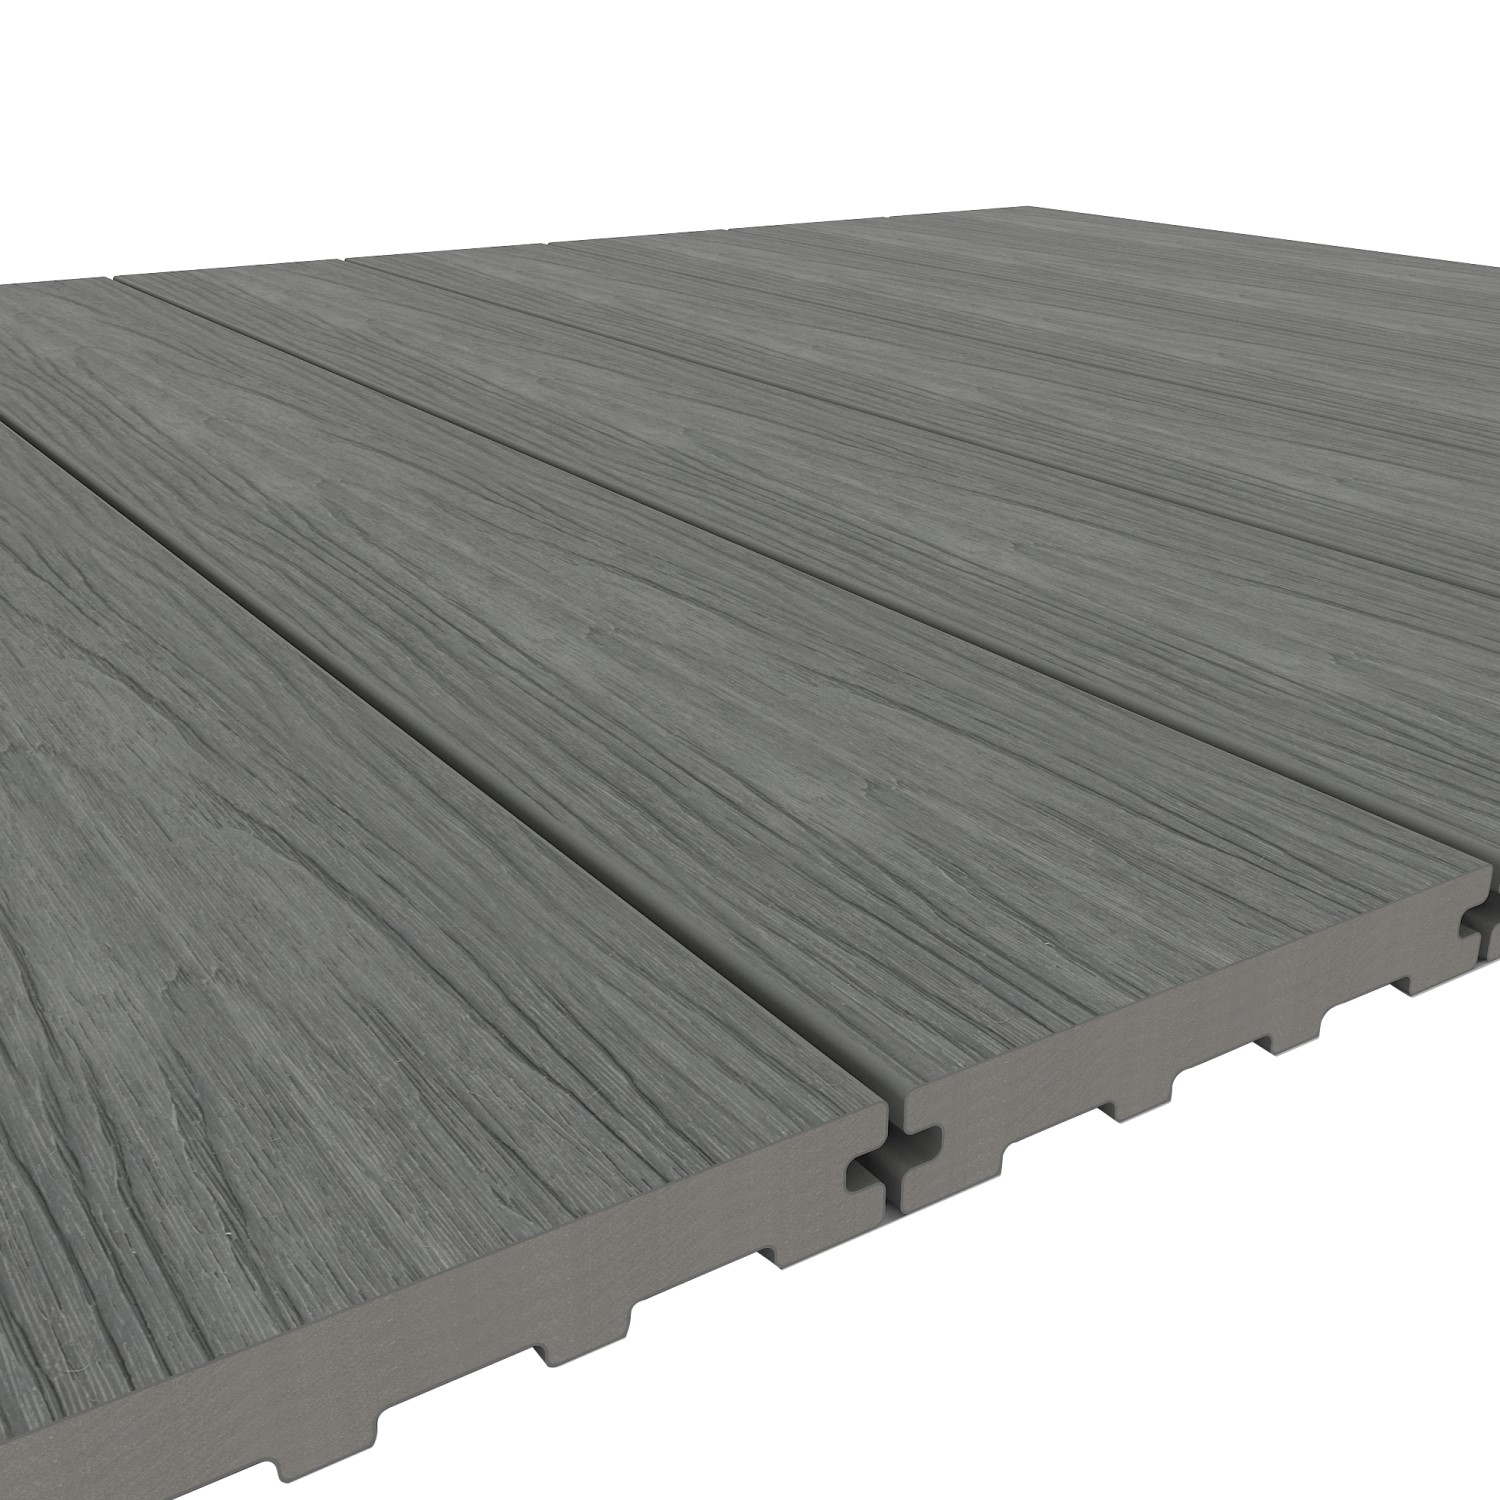 JSF Delivery Composite Decking